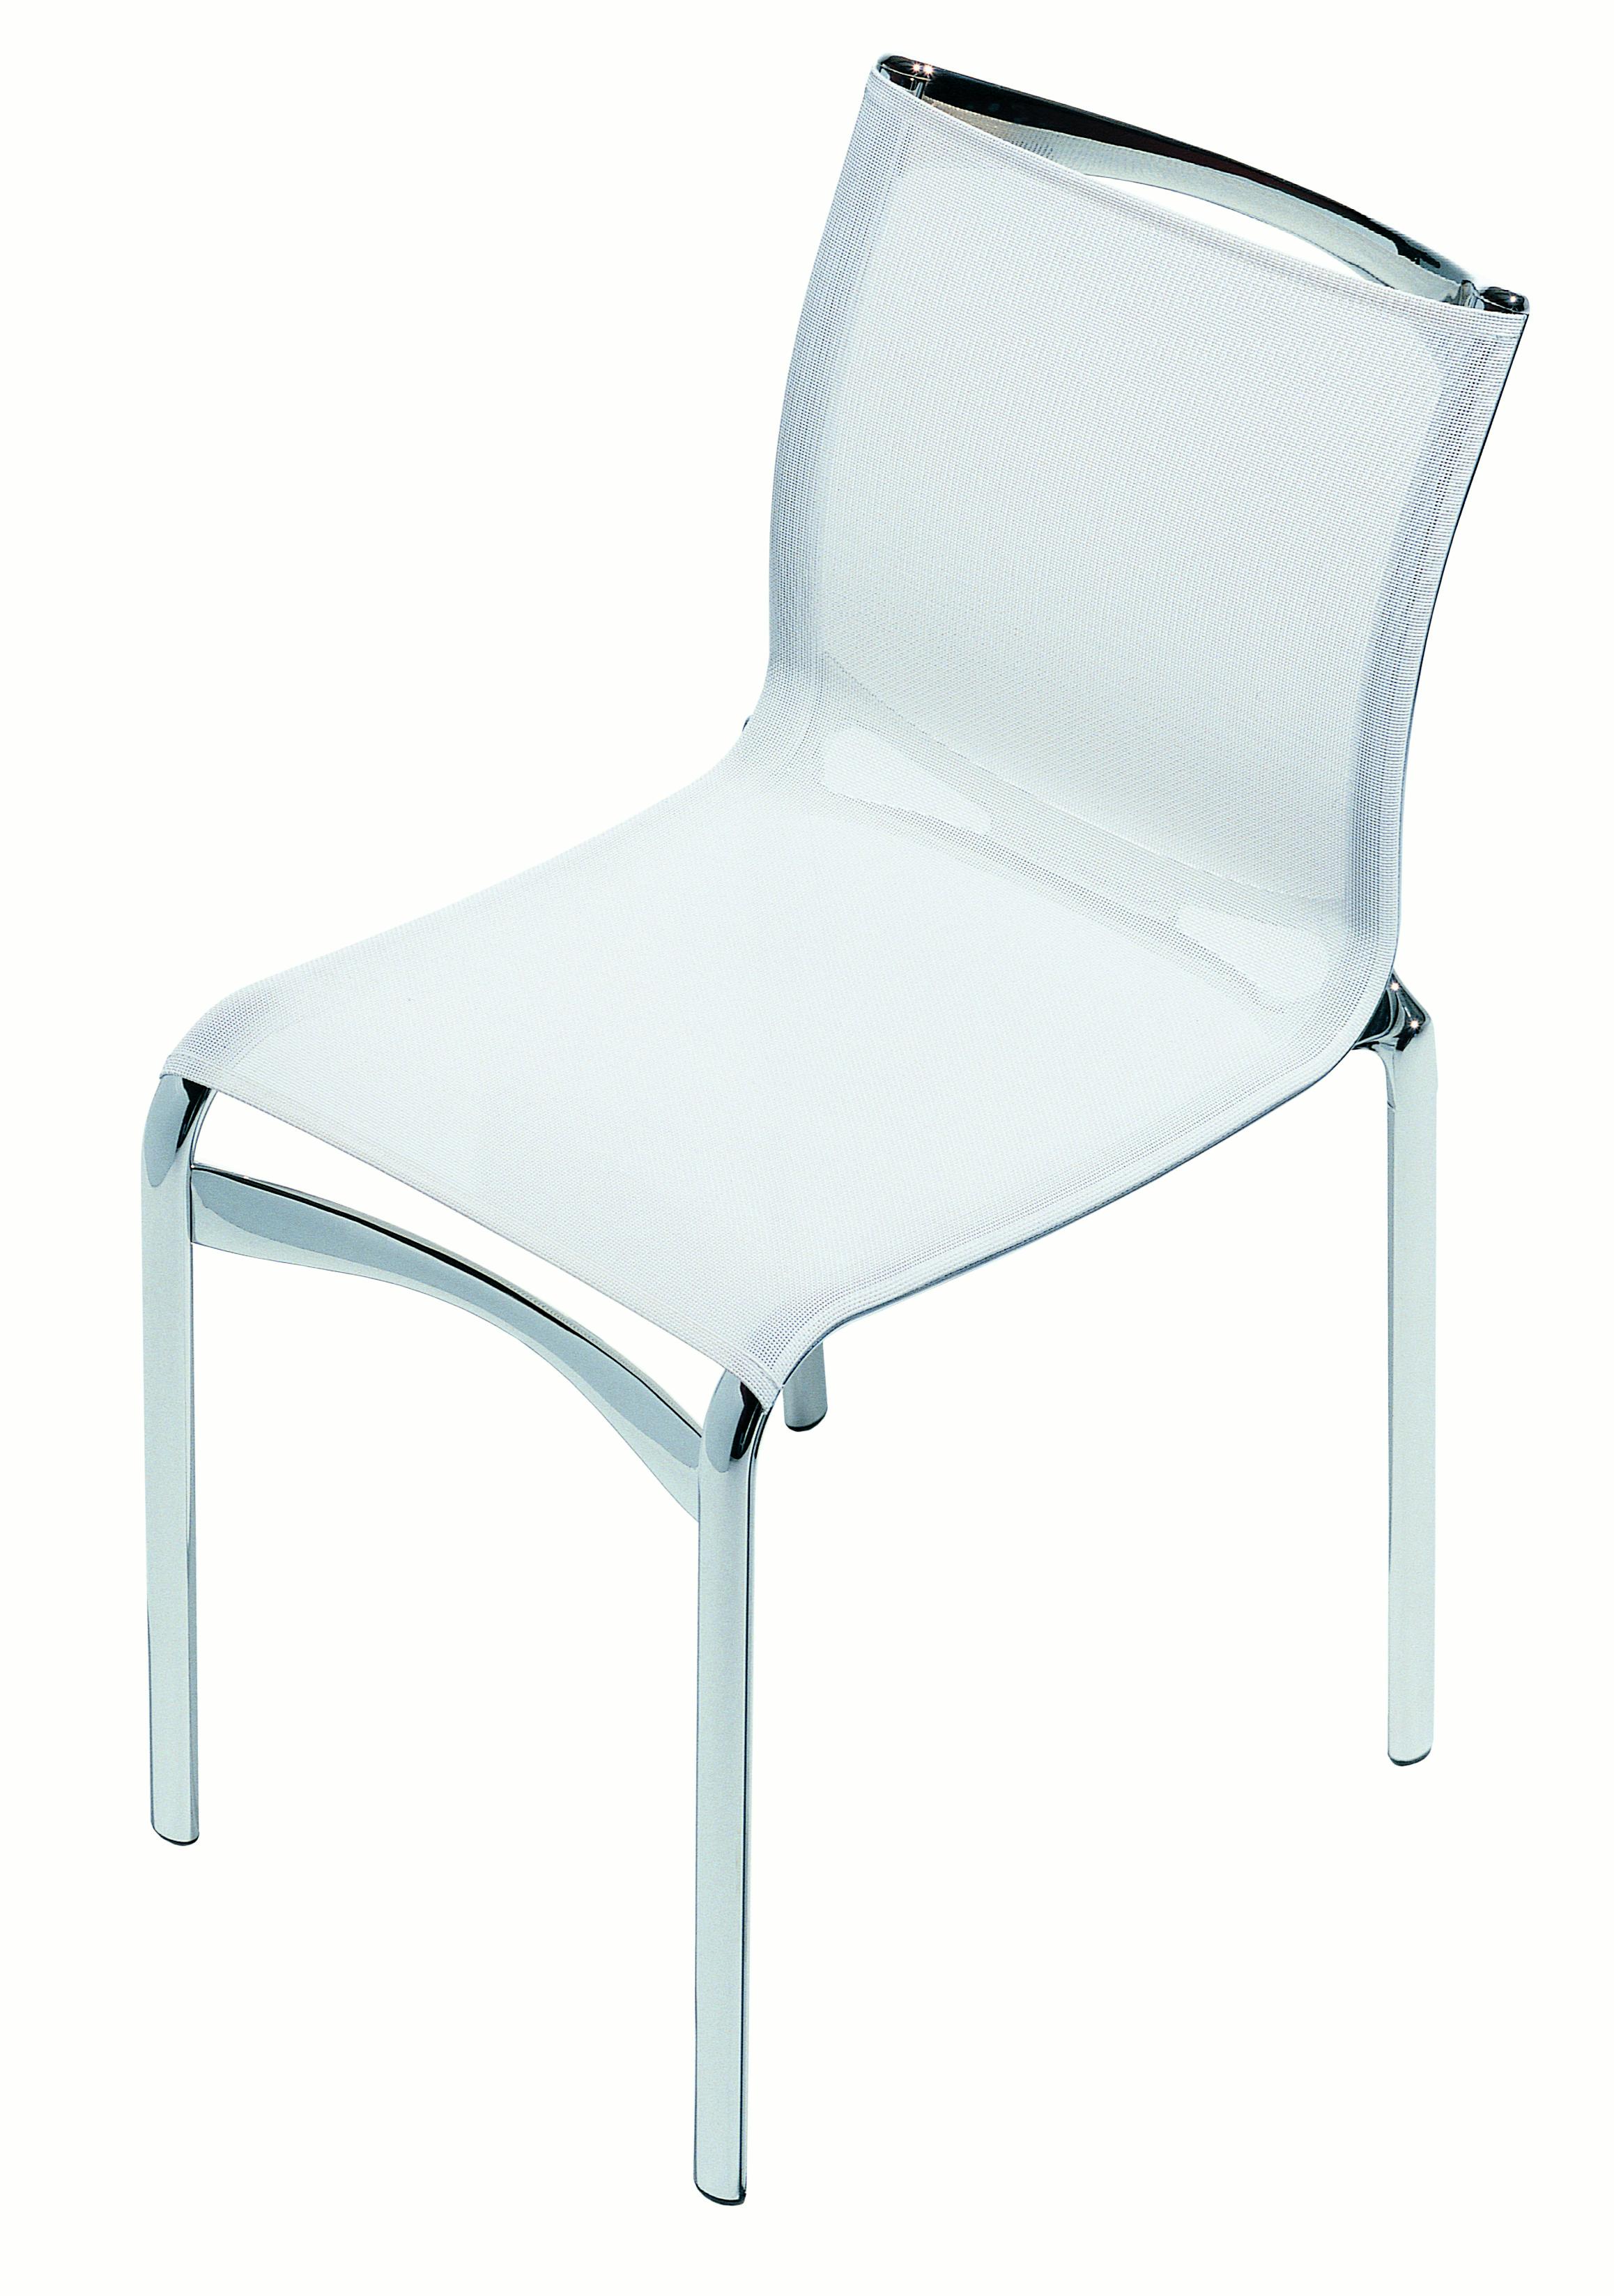 Alias Highframe 40 Chair in White Mesh Seat with Chromed Aluminium Frame by Alberto Meda

Stacking chair with structure composed of extruded aluminium profile and die-cast aluminium elements. Seat and back in fire retardant PVC covered polyester